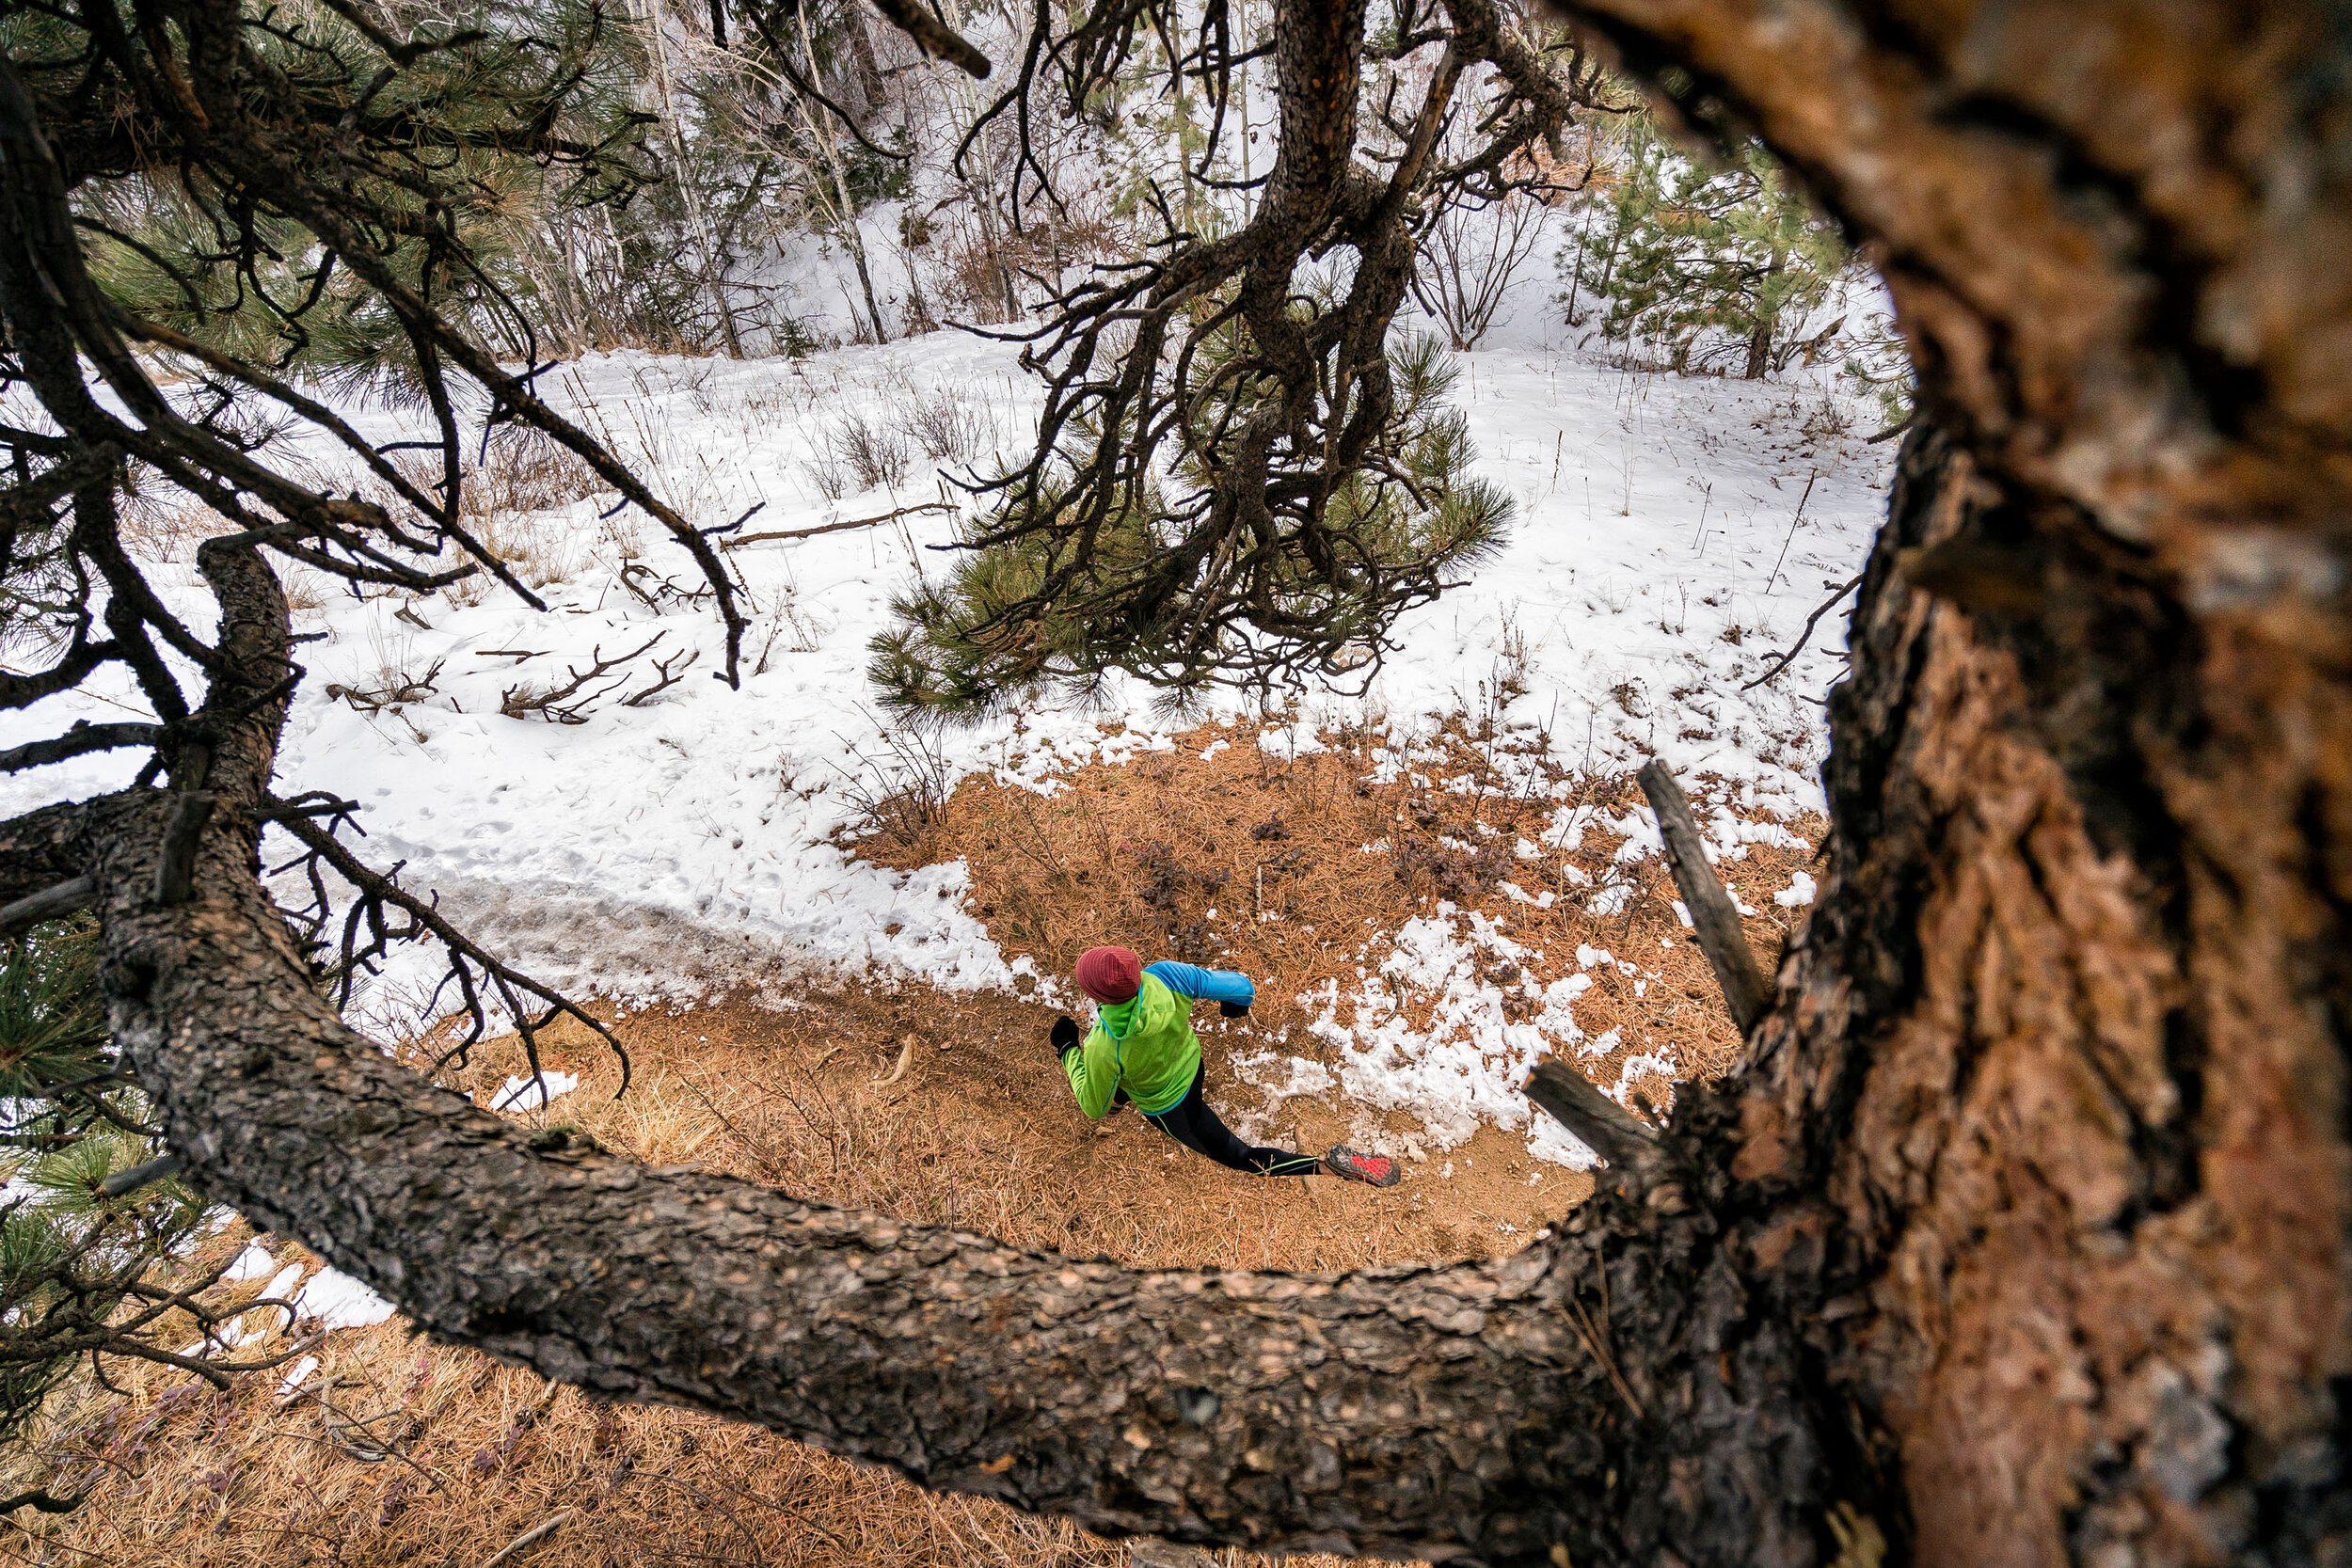  Adventure: Louis Aravelo trail running in the snow on the Apex trail near Golden, Colorado 